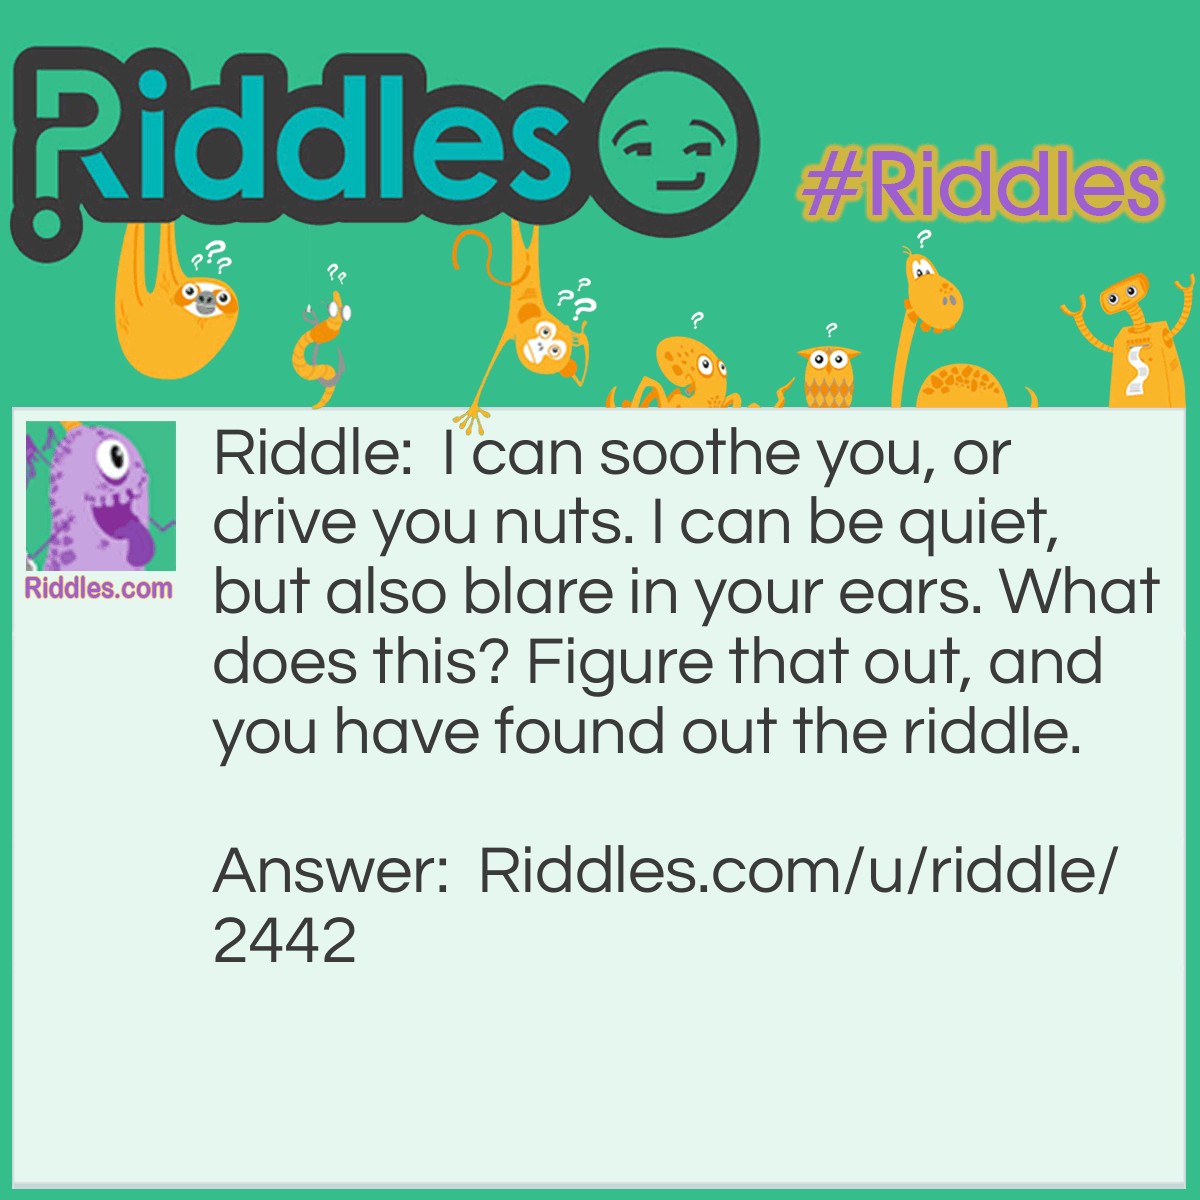 Riddle: I can soothe you, or drive you nuts. I can be quiet, but also blare in your ears. What does this? Figure that out, and you have found out the riddle. Answer: Music ( ROCK!!!! or classical)